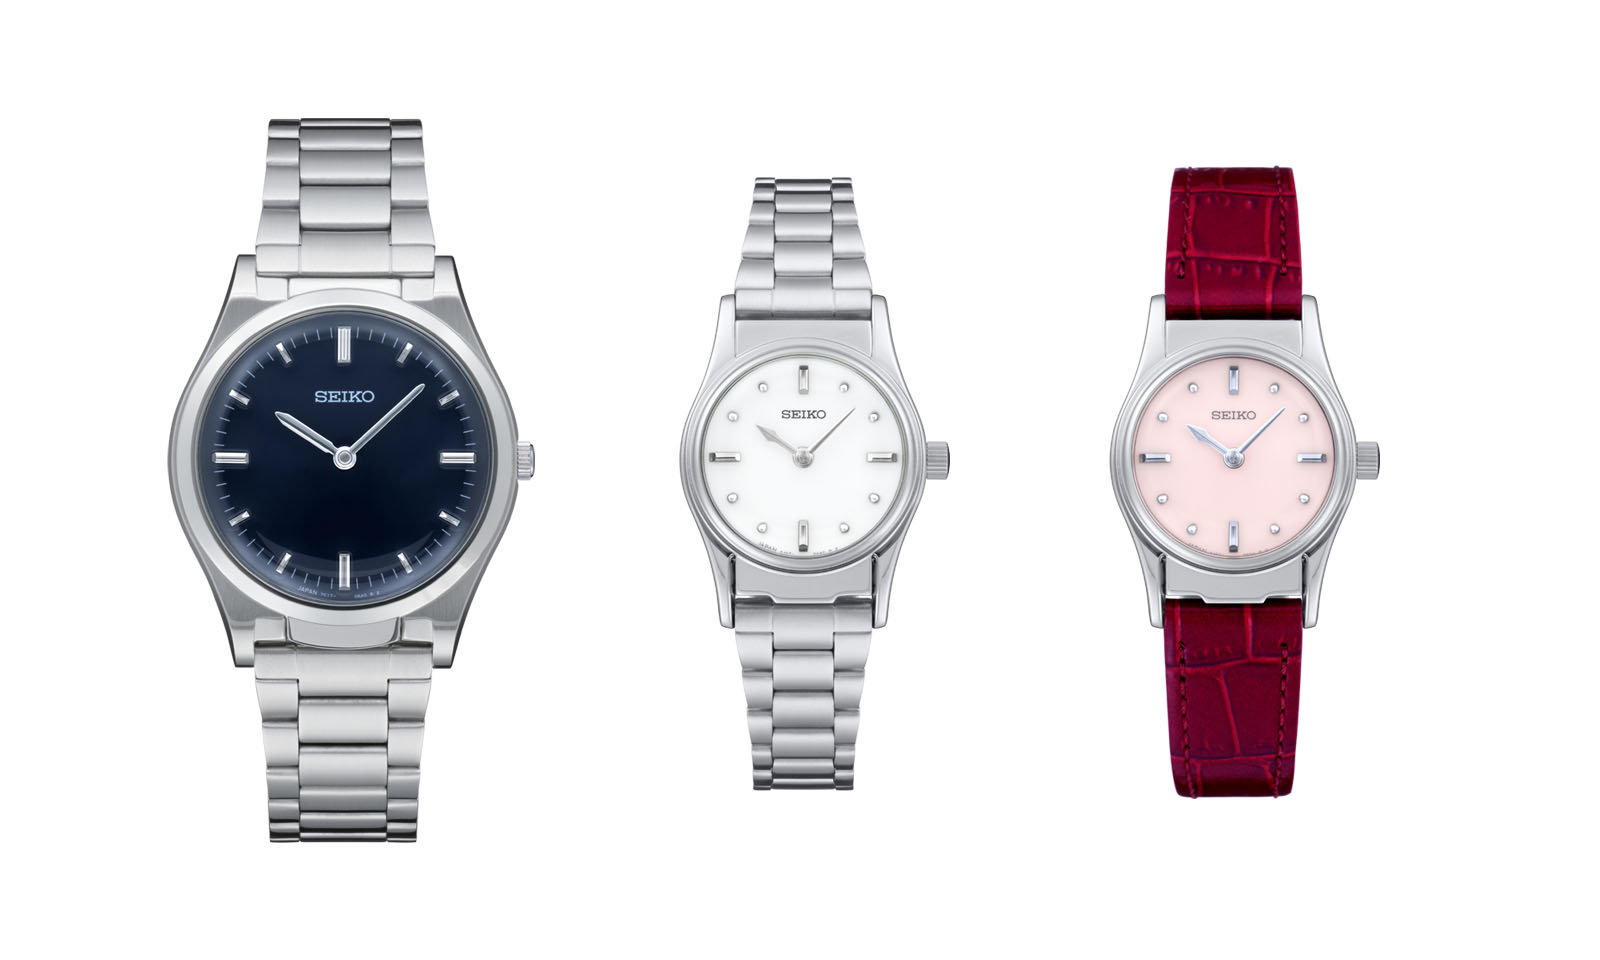 Photos of three tactile watches